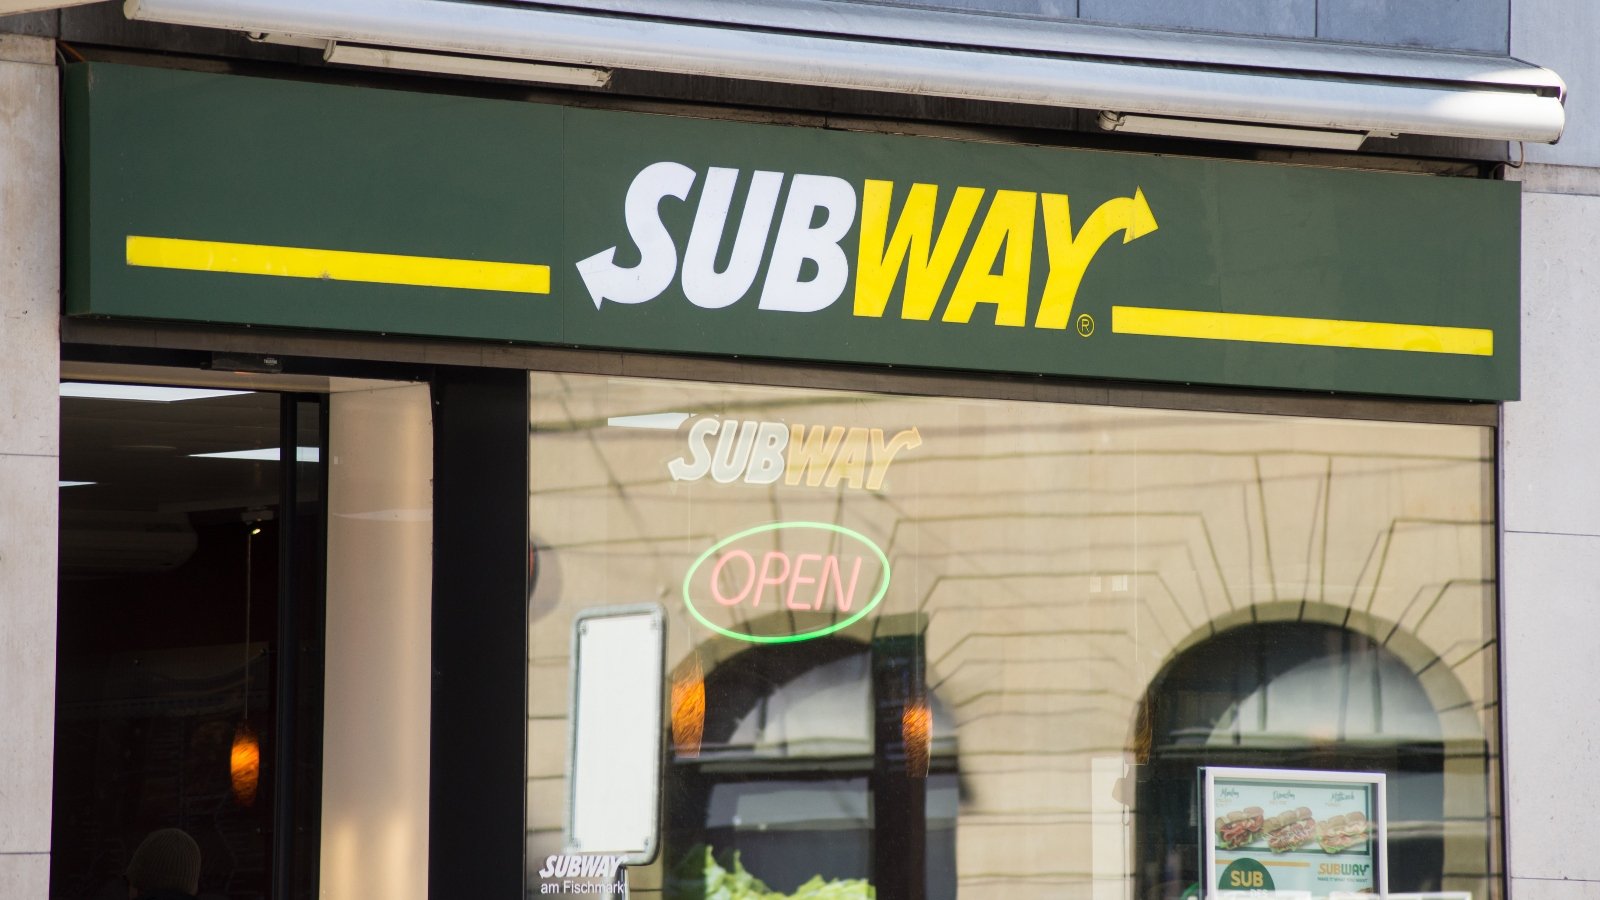 According to Vegan Food UK, Subway is about to release a vegan chicken tikka sub